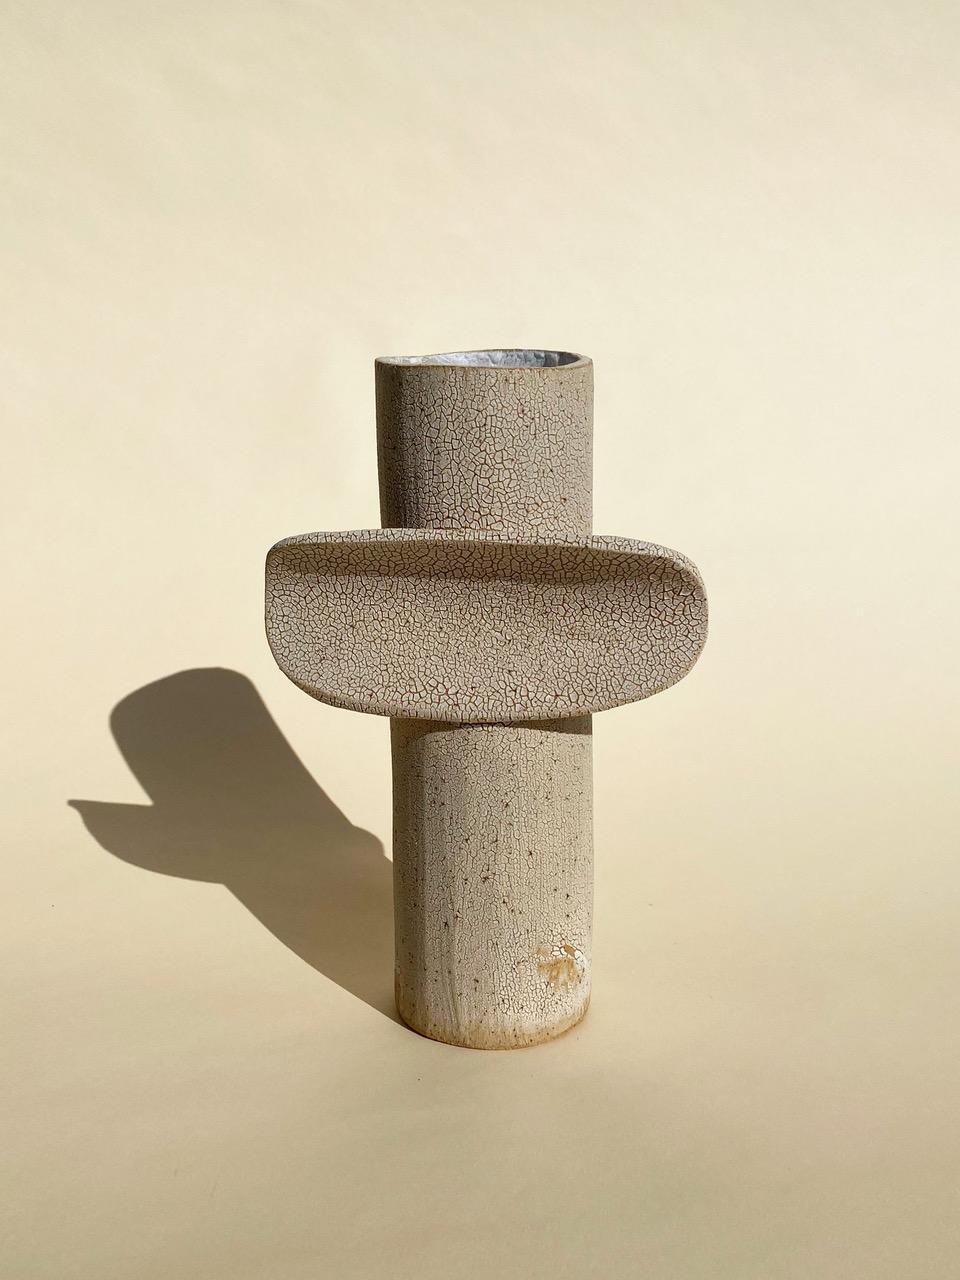 Large Crackled Totem by Olivia Cognet
Materials: Clay
Dimensions: h Around 35 cm

Available in different sizes, sets available.

Totem
Vases, lamps and sculptures with graphic forms, made from clay that gives them a rough look..

Each of